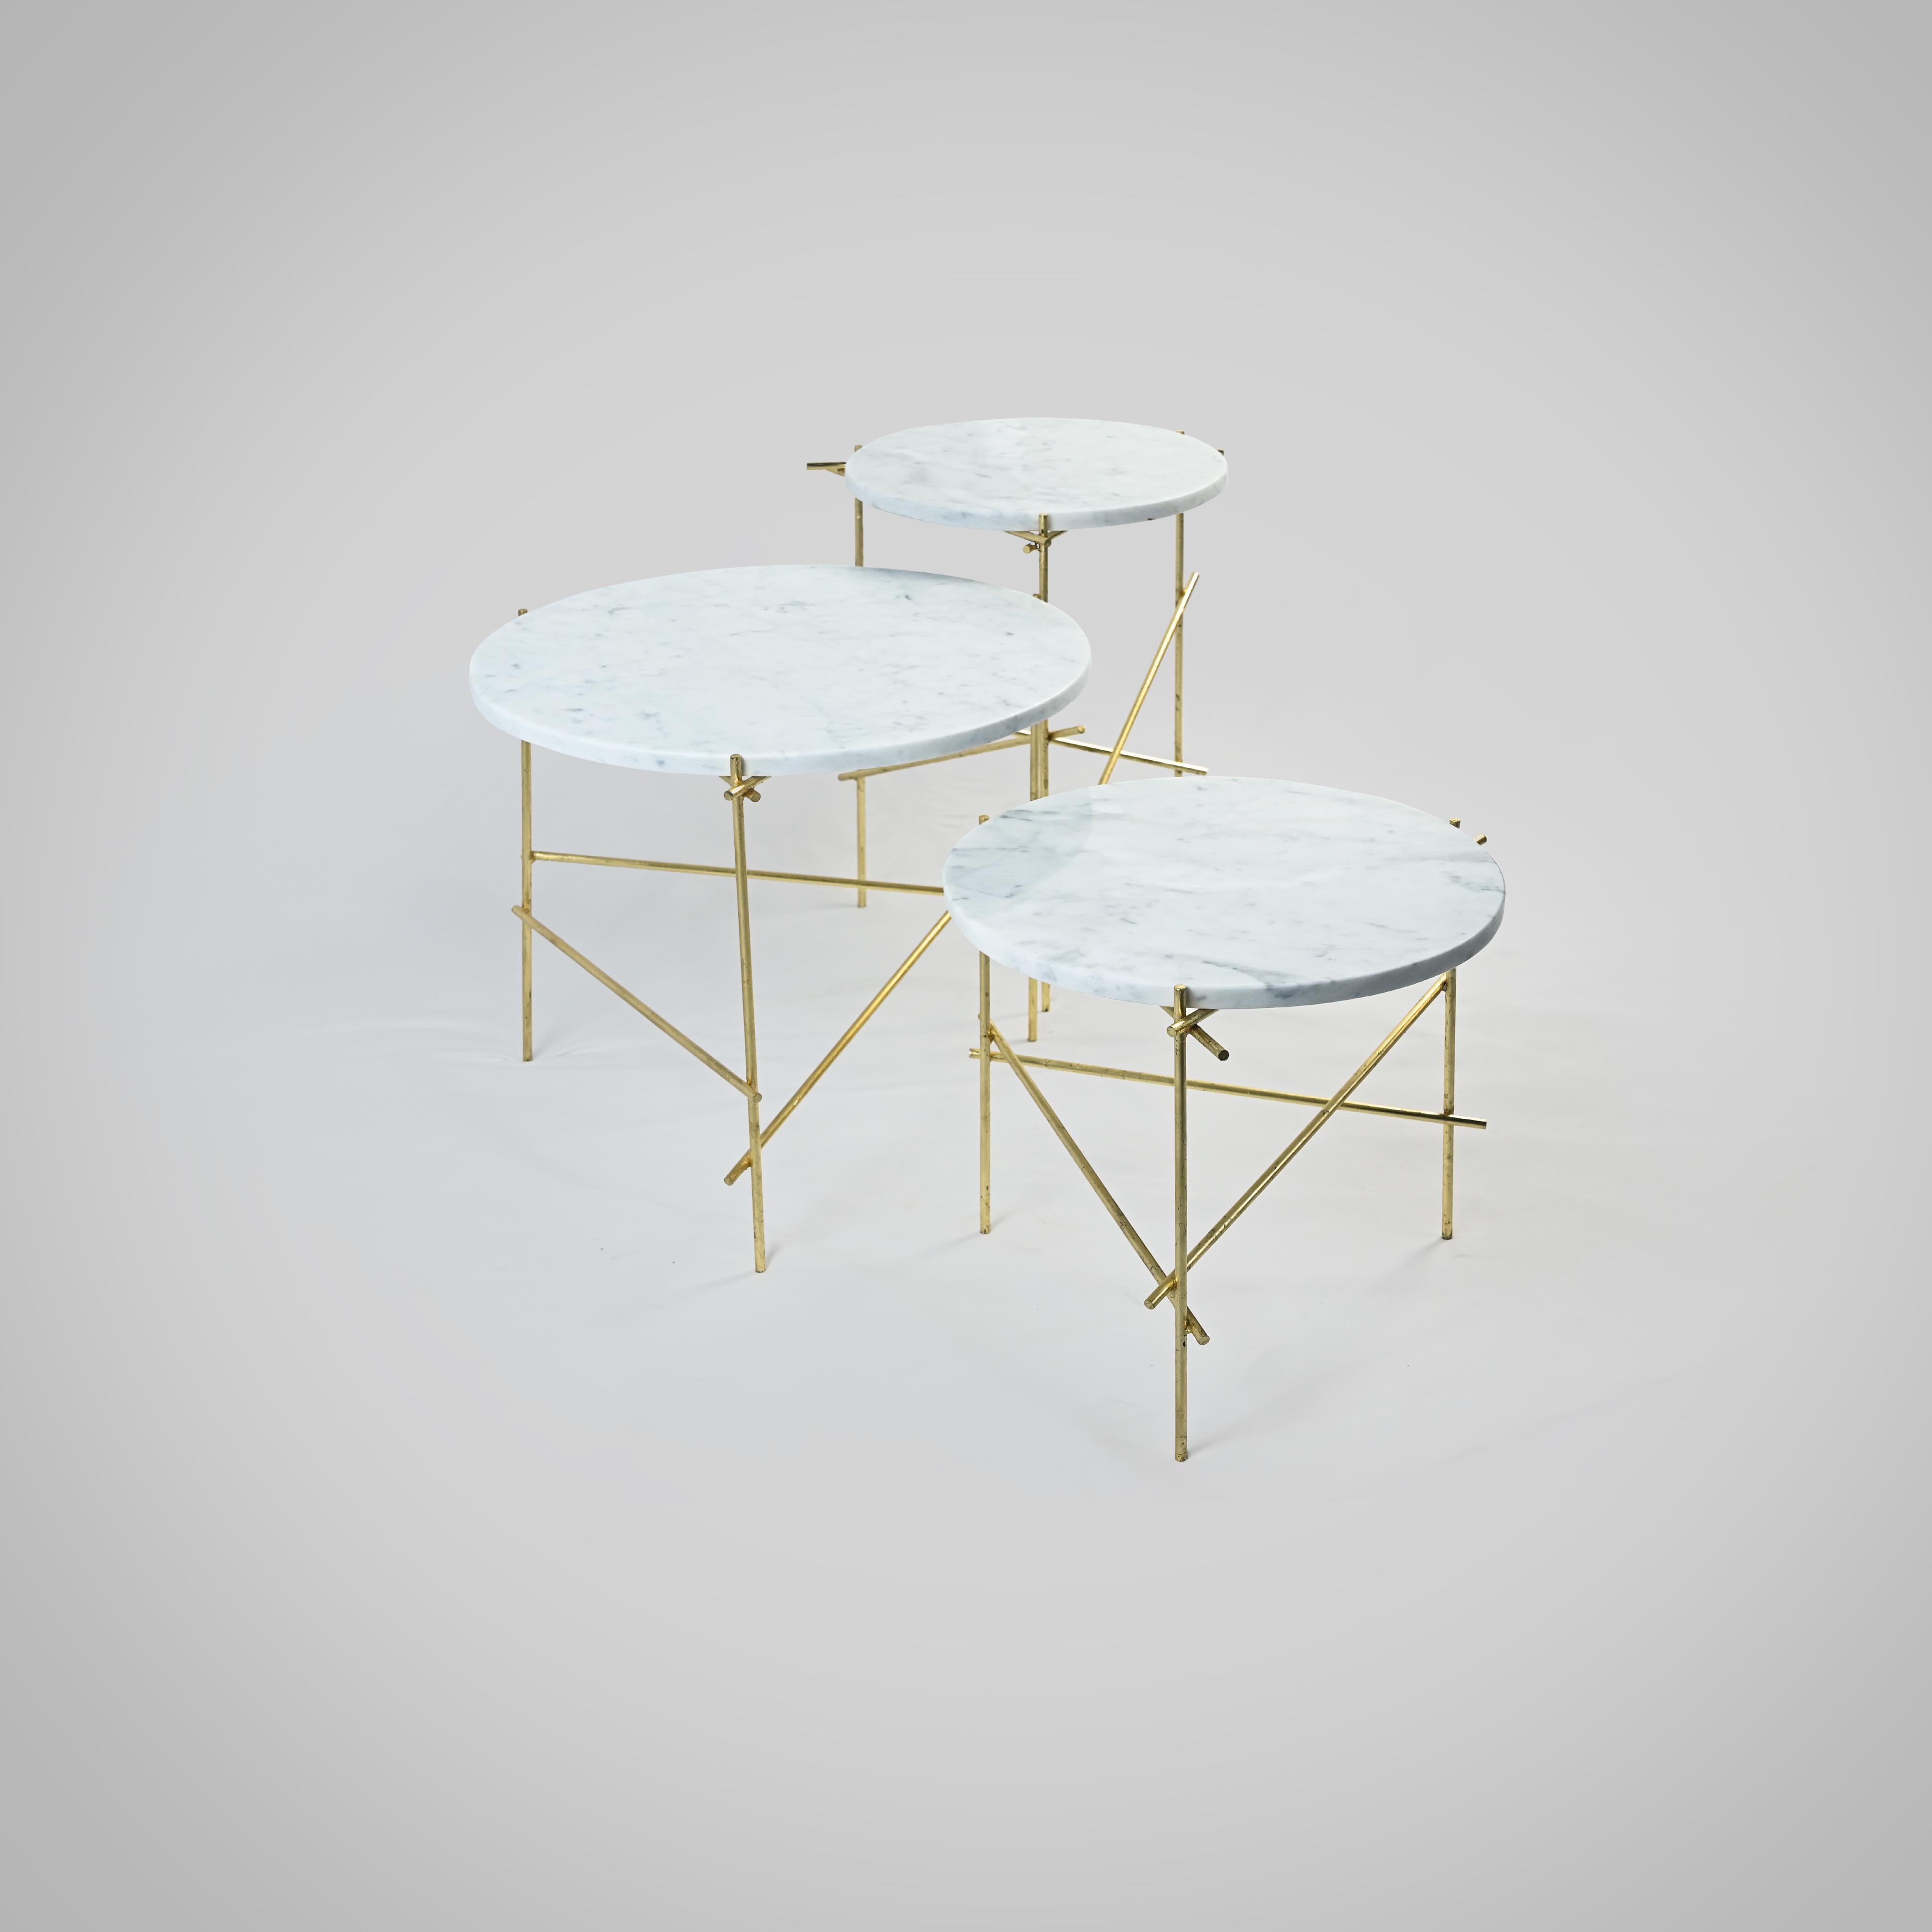 Modern The Slilts, Carrara Marble and Gold Leaf Coffee Tables By DFdesignlab  For Sale